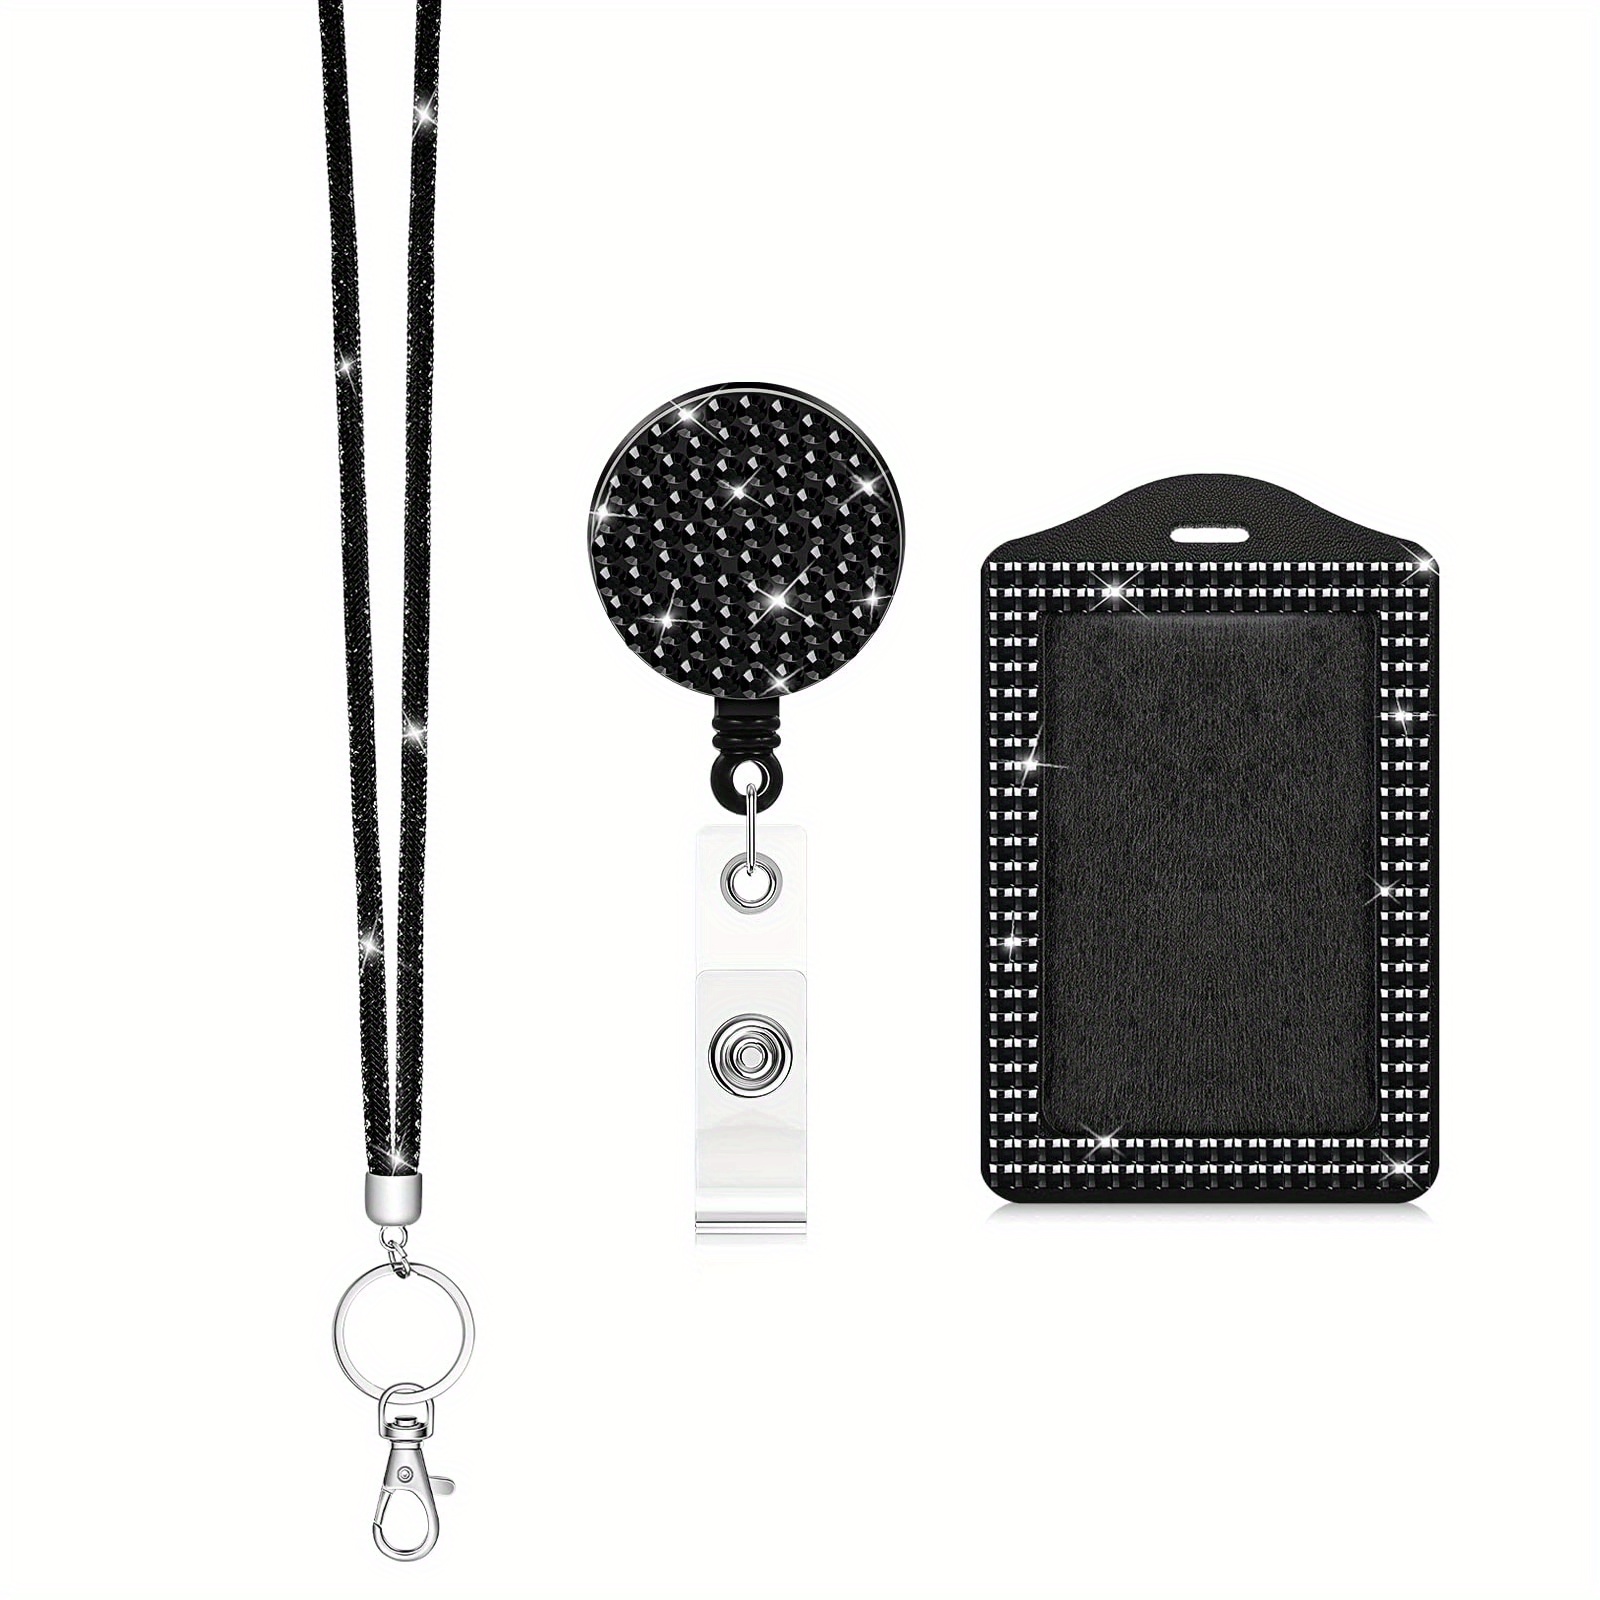 Rhinestone,Home,Bling Lanyard with ID Badge Holder Lanyard for ID Badge Diamond Crystal ID Card Holder Retractable Sparkly Lanyard with Metal Clasp